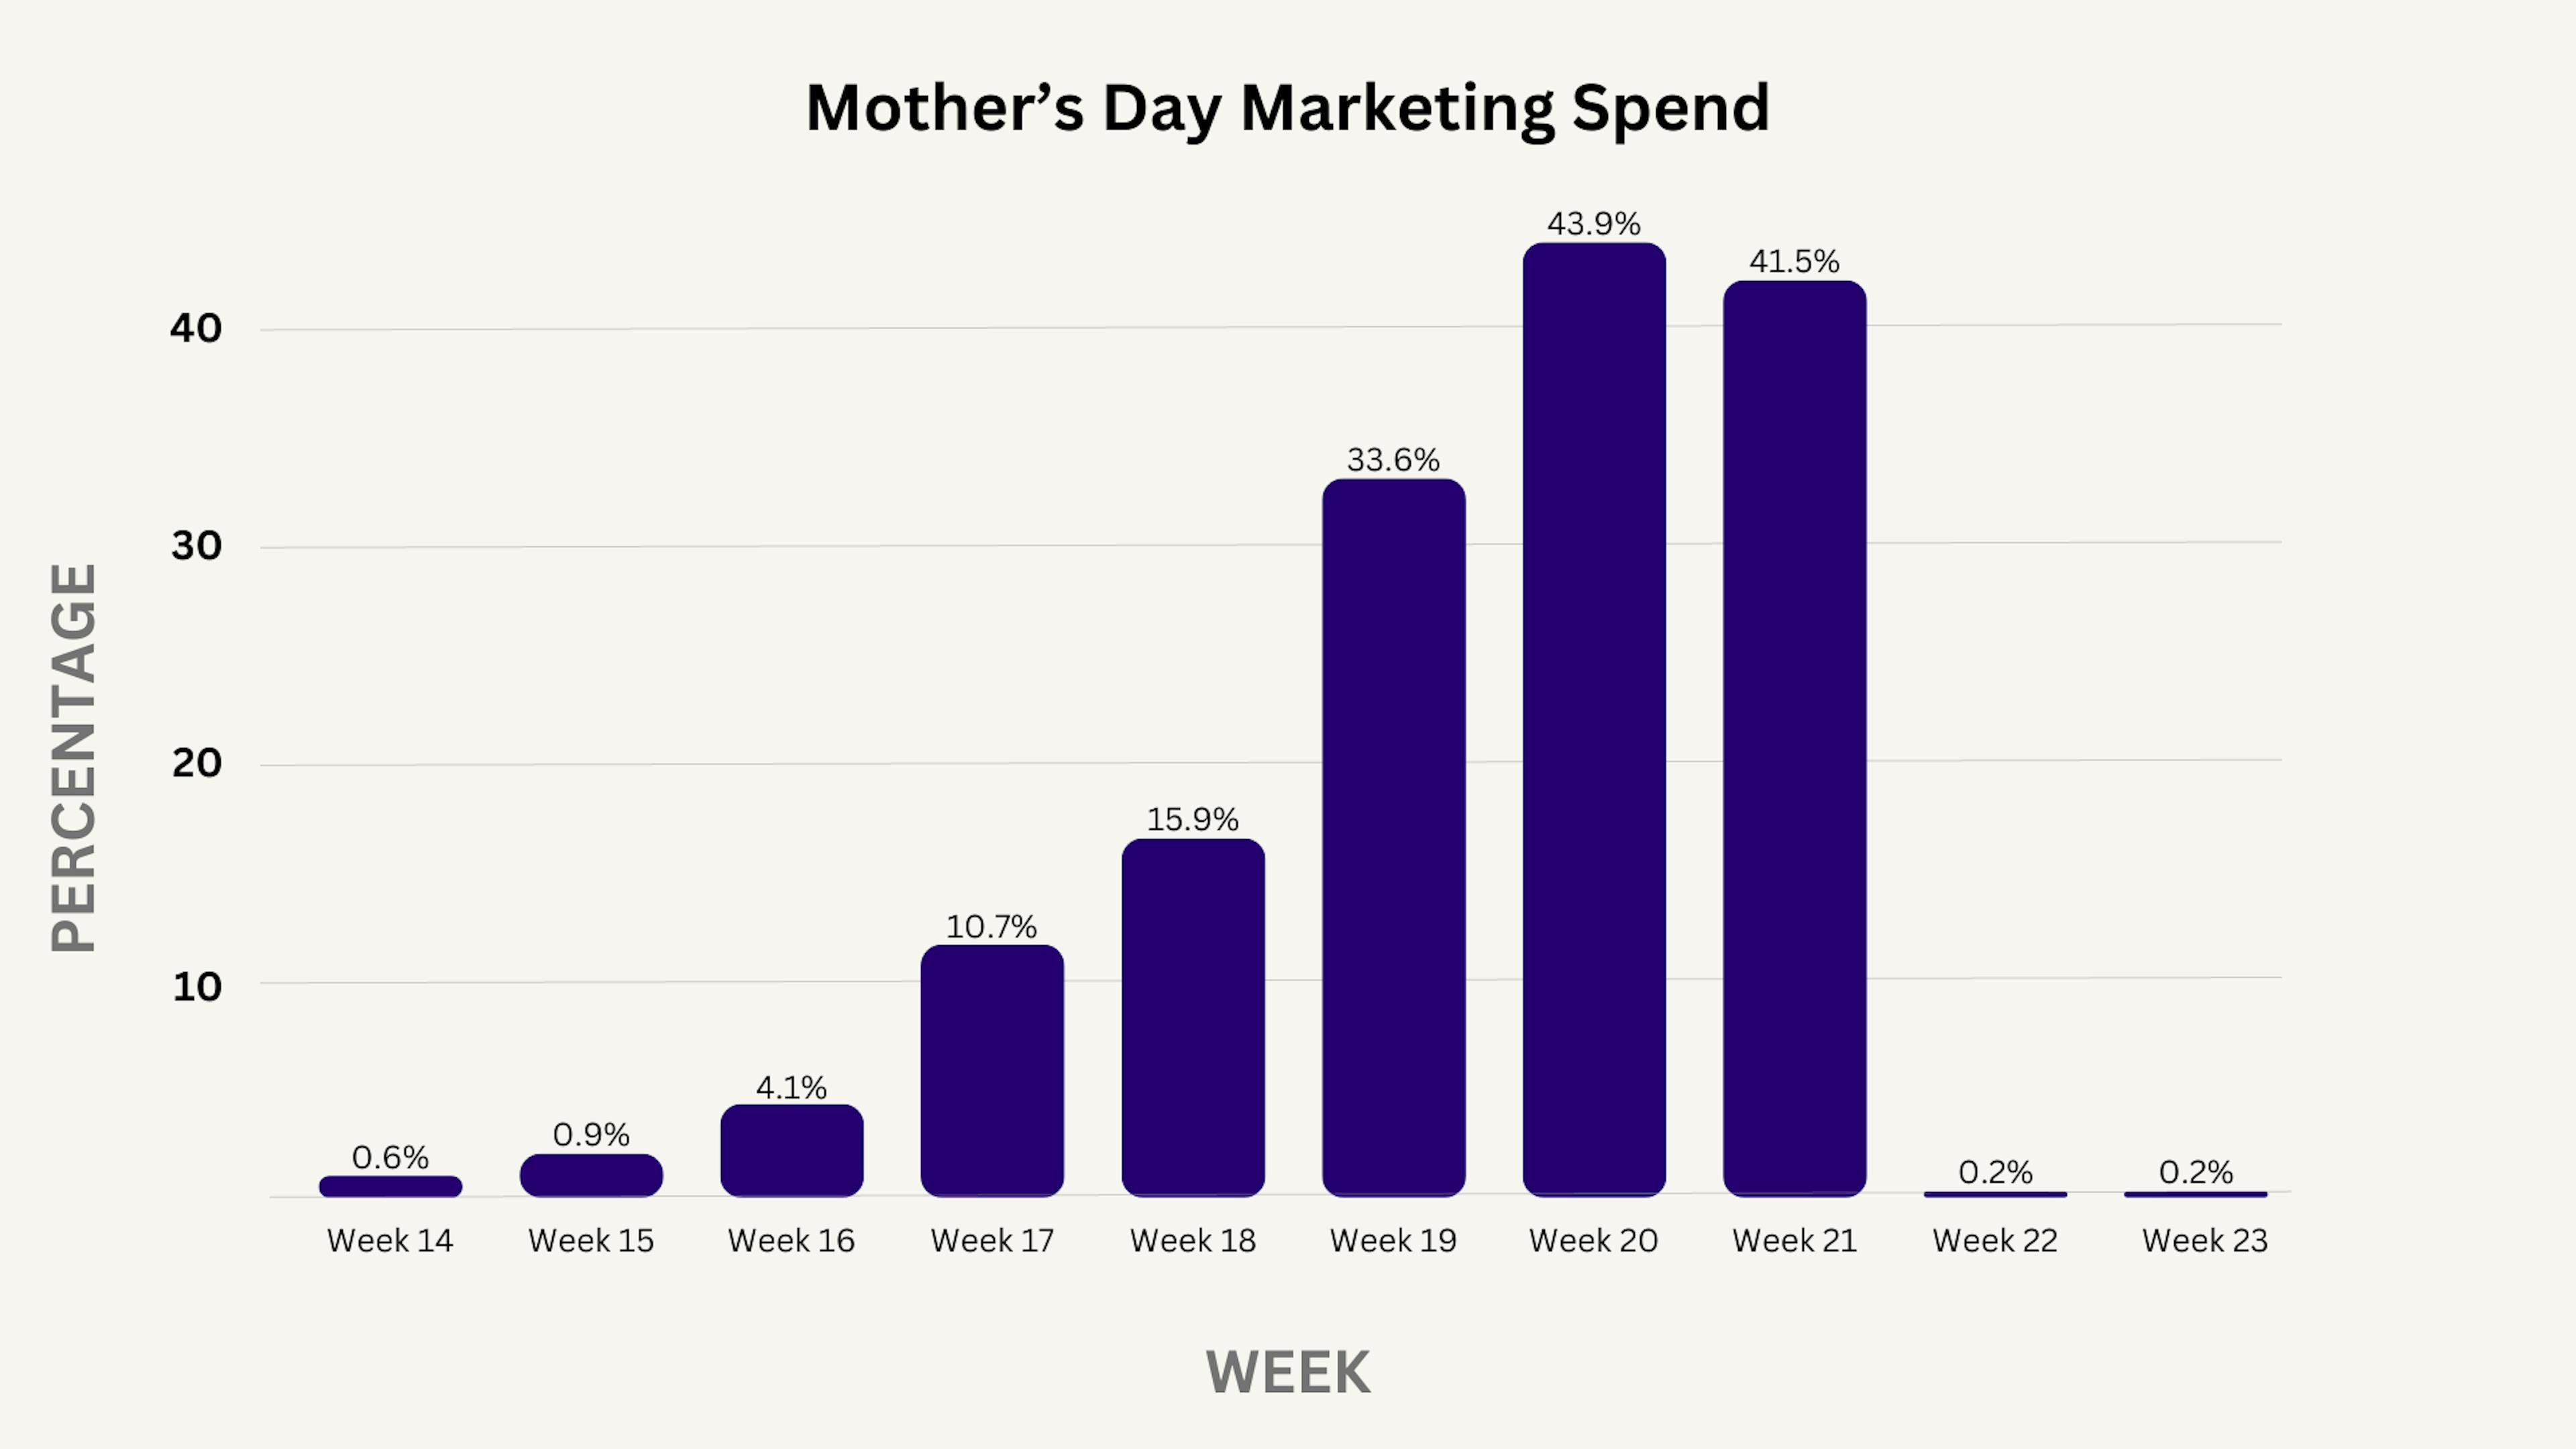 projected marketing spend for Mother's Day